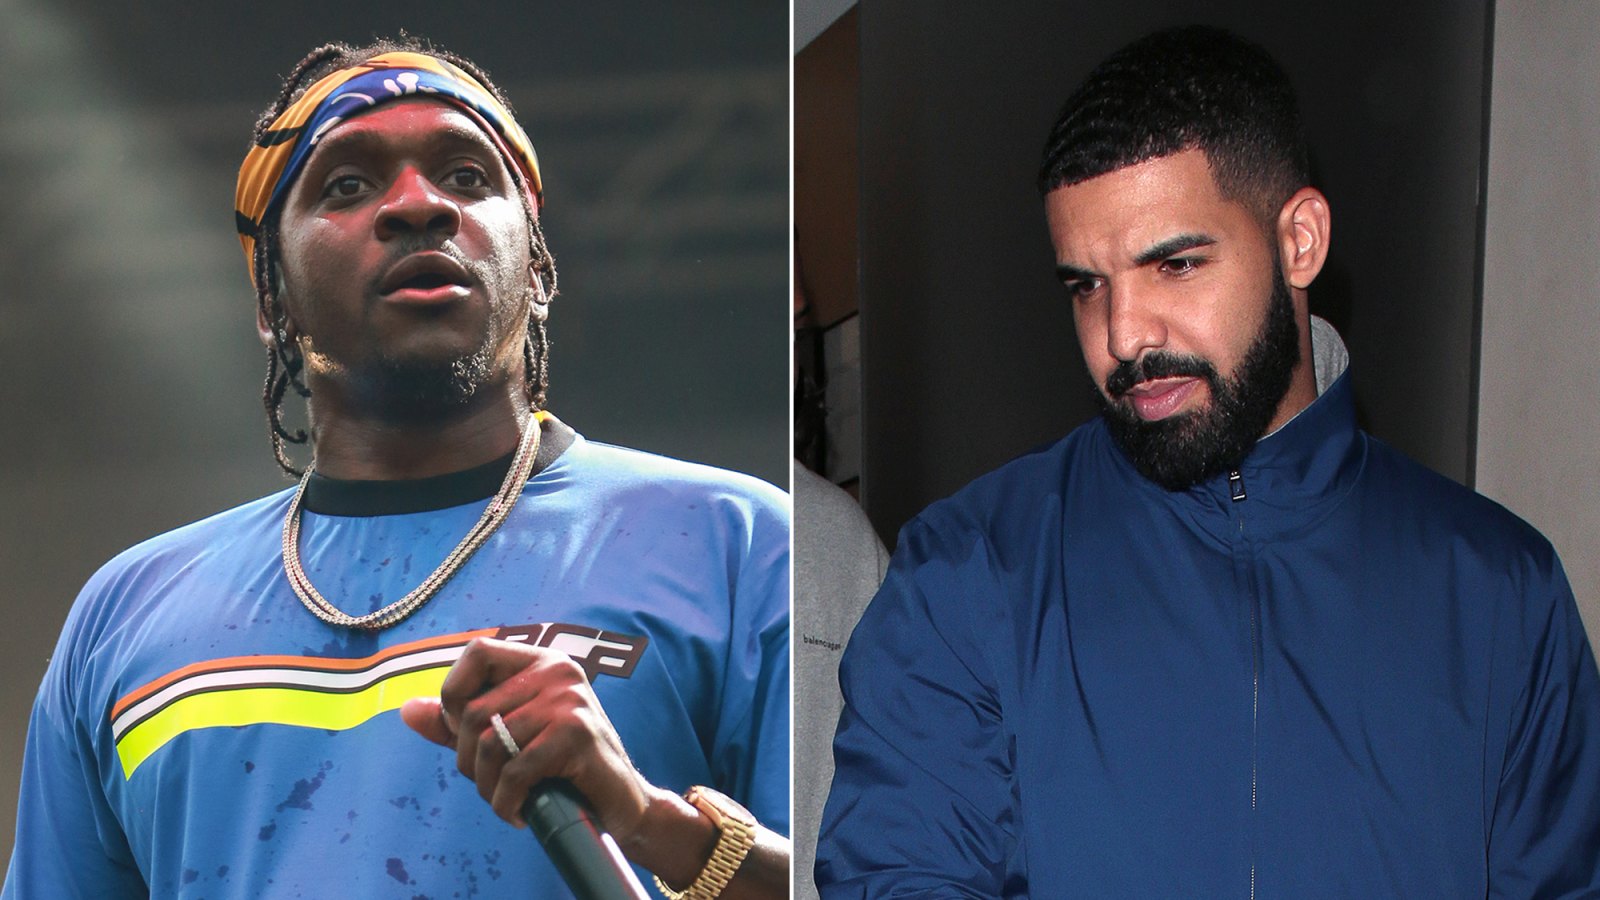 Pusha T Blames Drake for Massive Brawl That Broke Out at His Concert and Sent 3 Fans to the Hospital